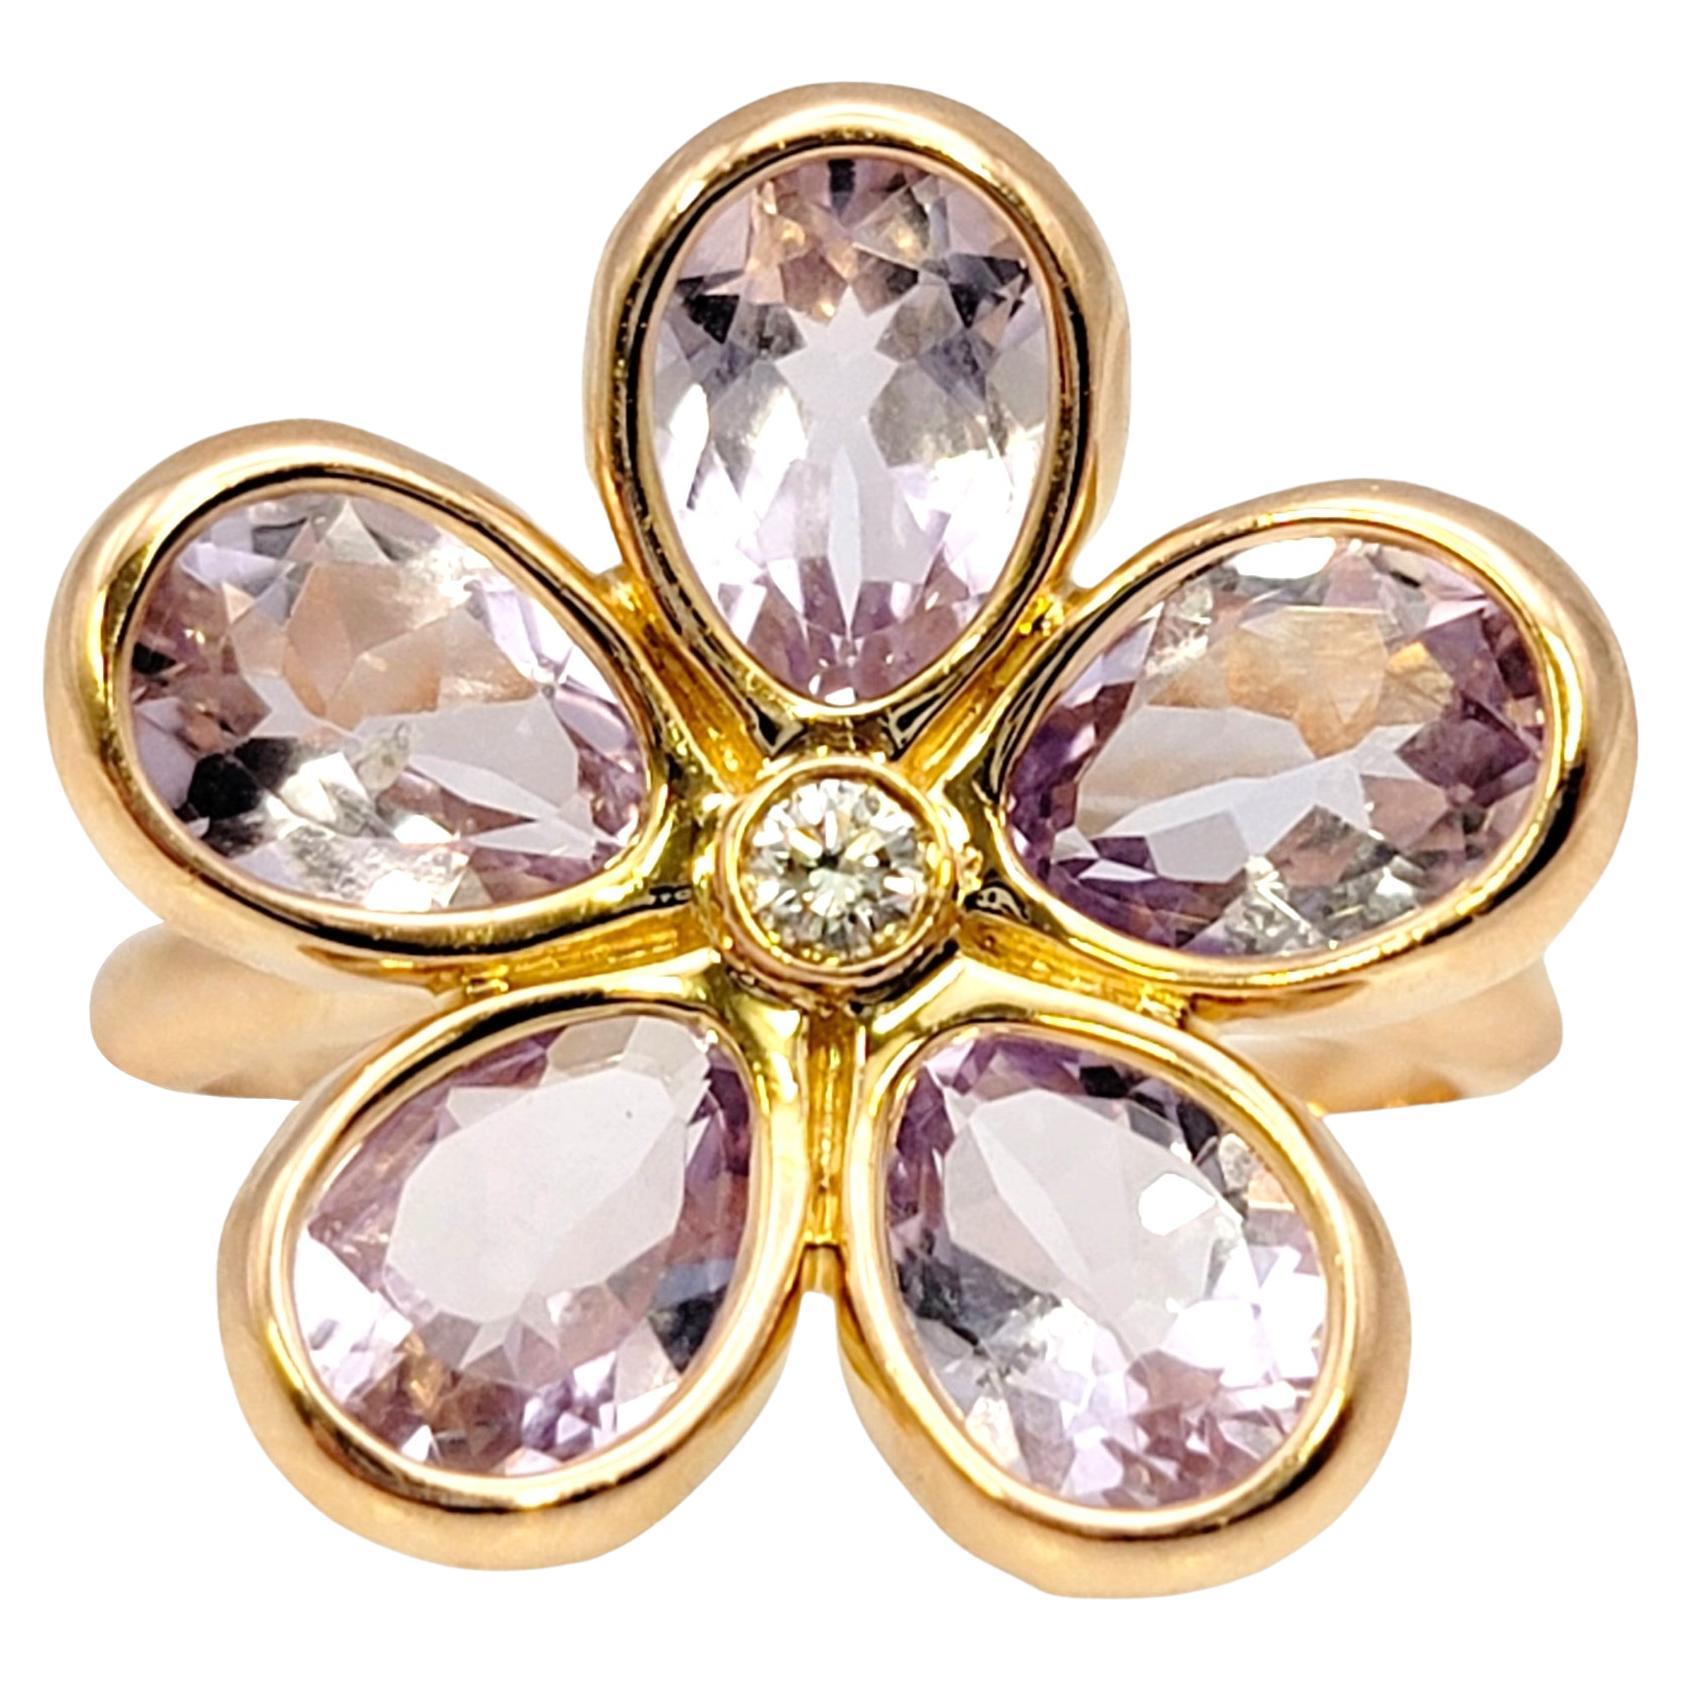 Tiffany & Co. Amethyst and Diamond Sparklers Flower Ring in 18 Karat Rose Gold